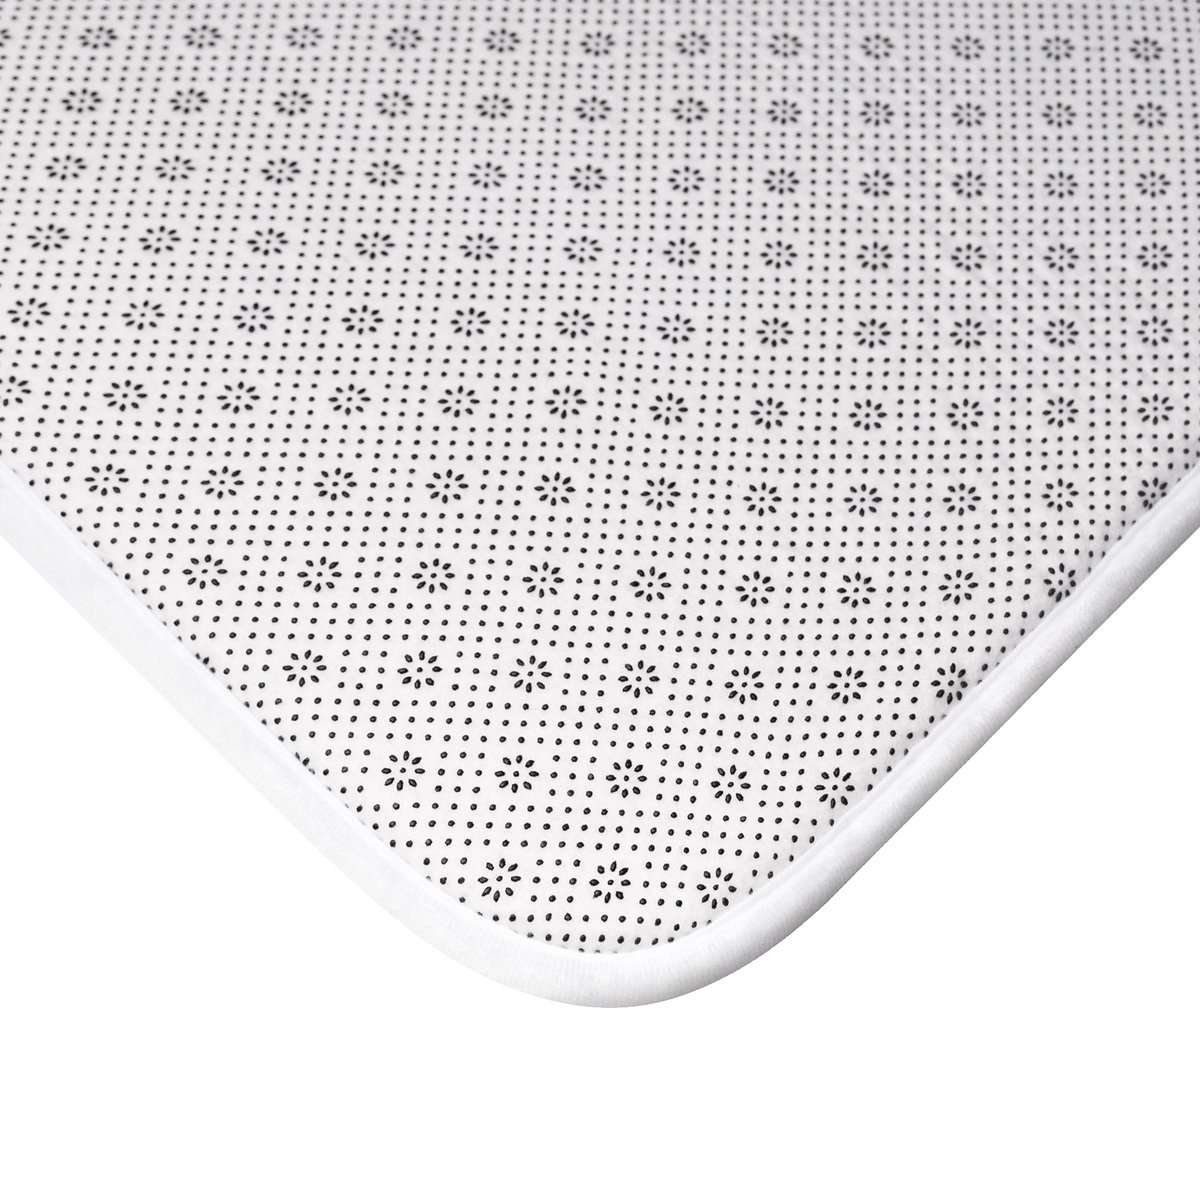 shop-the-official-online-store-of-arcturian-metamorphosis-grid-bath-mat-hot-on-sale_2.jpg